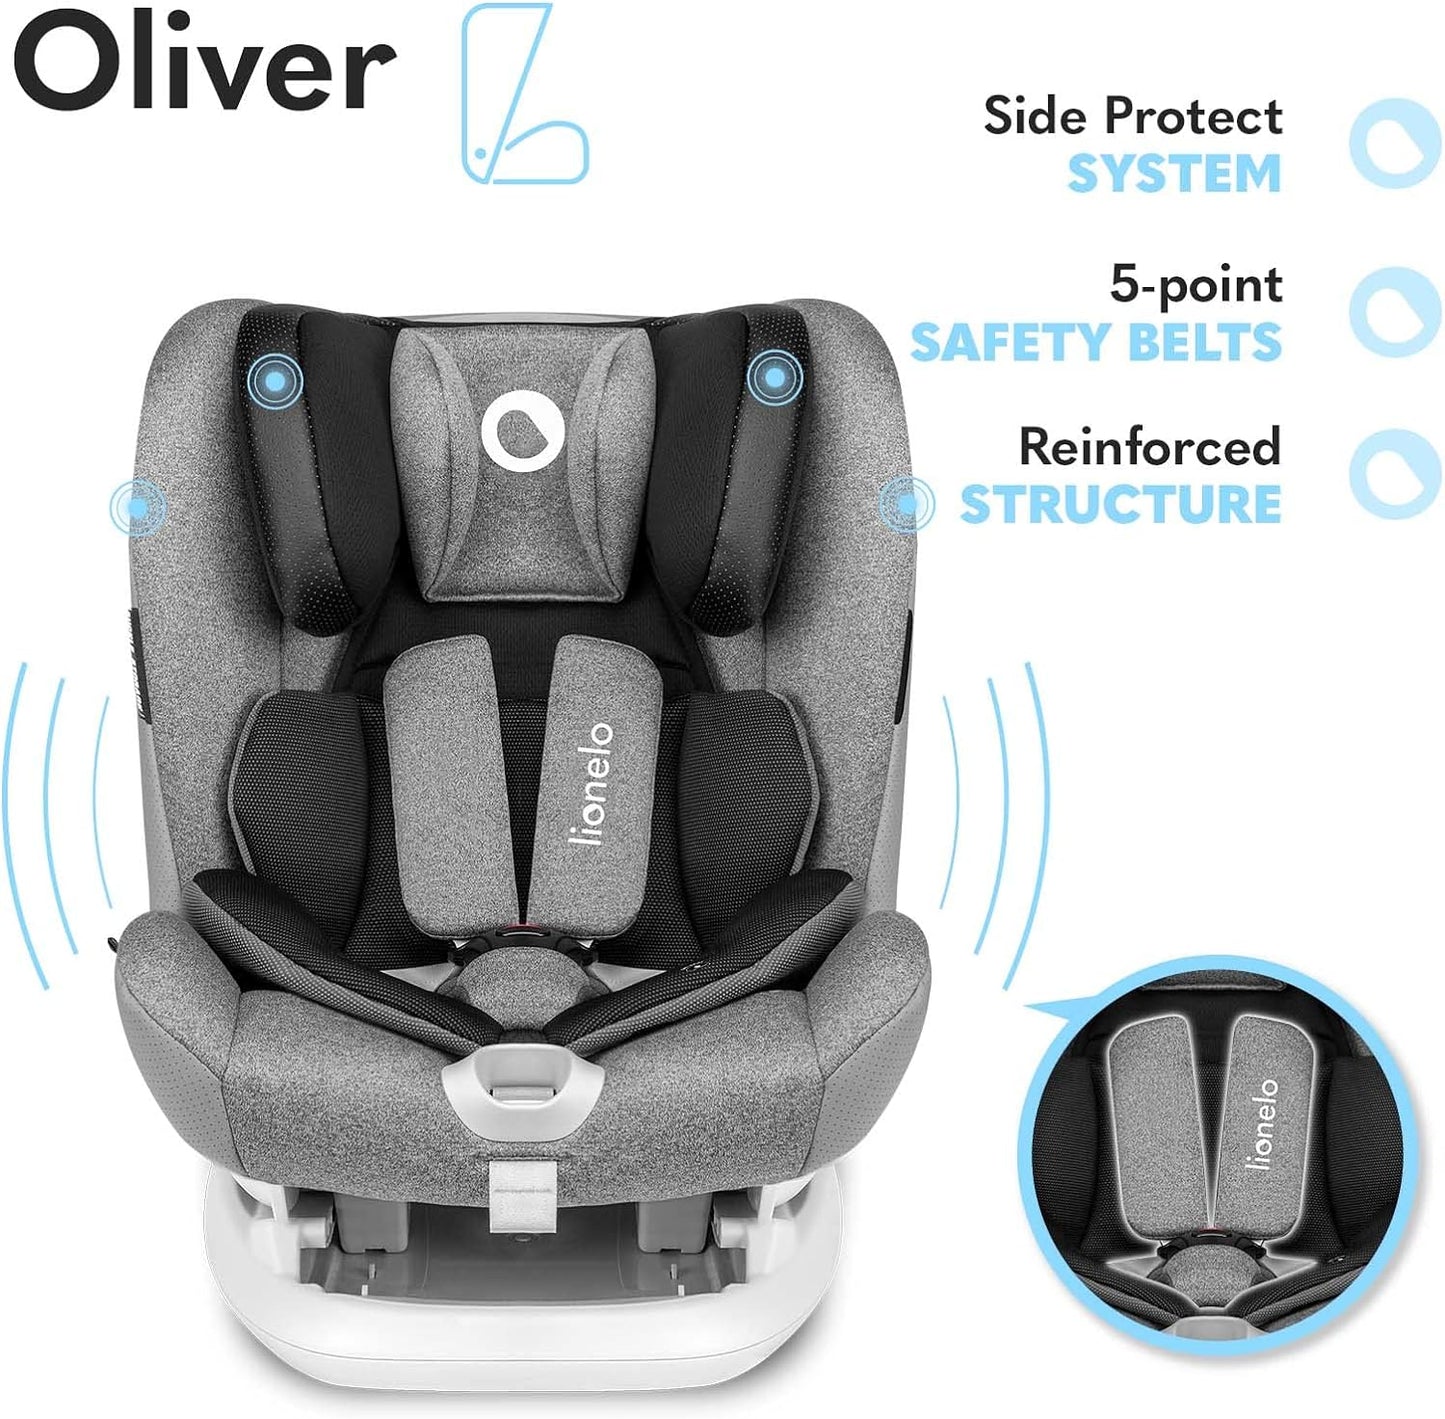 LIONELO Oliver Baby Car Seat